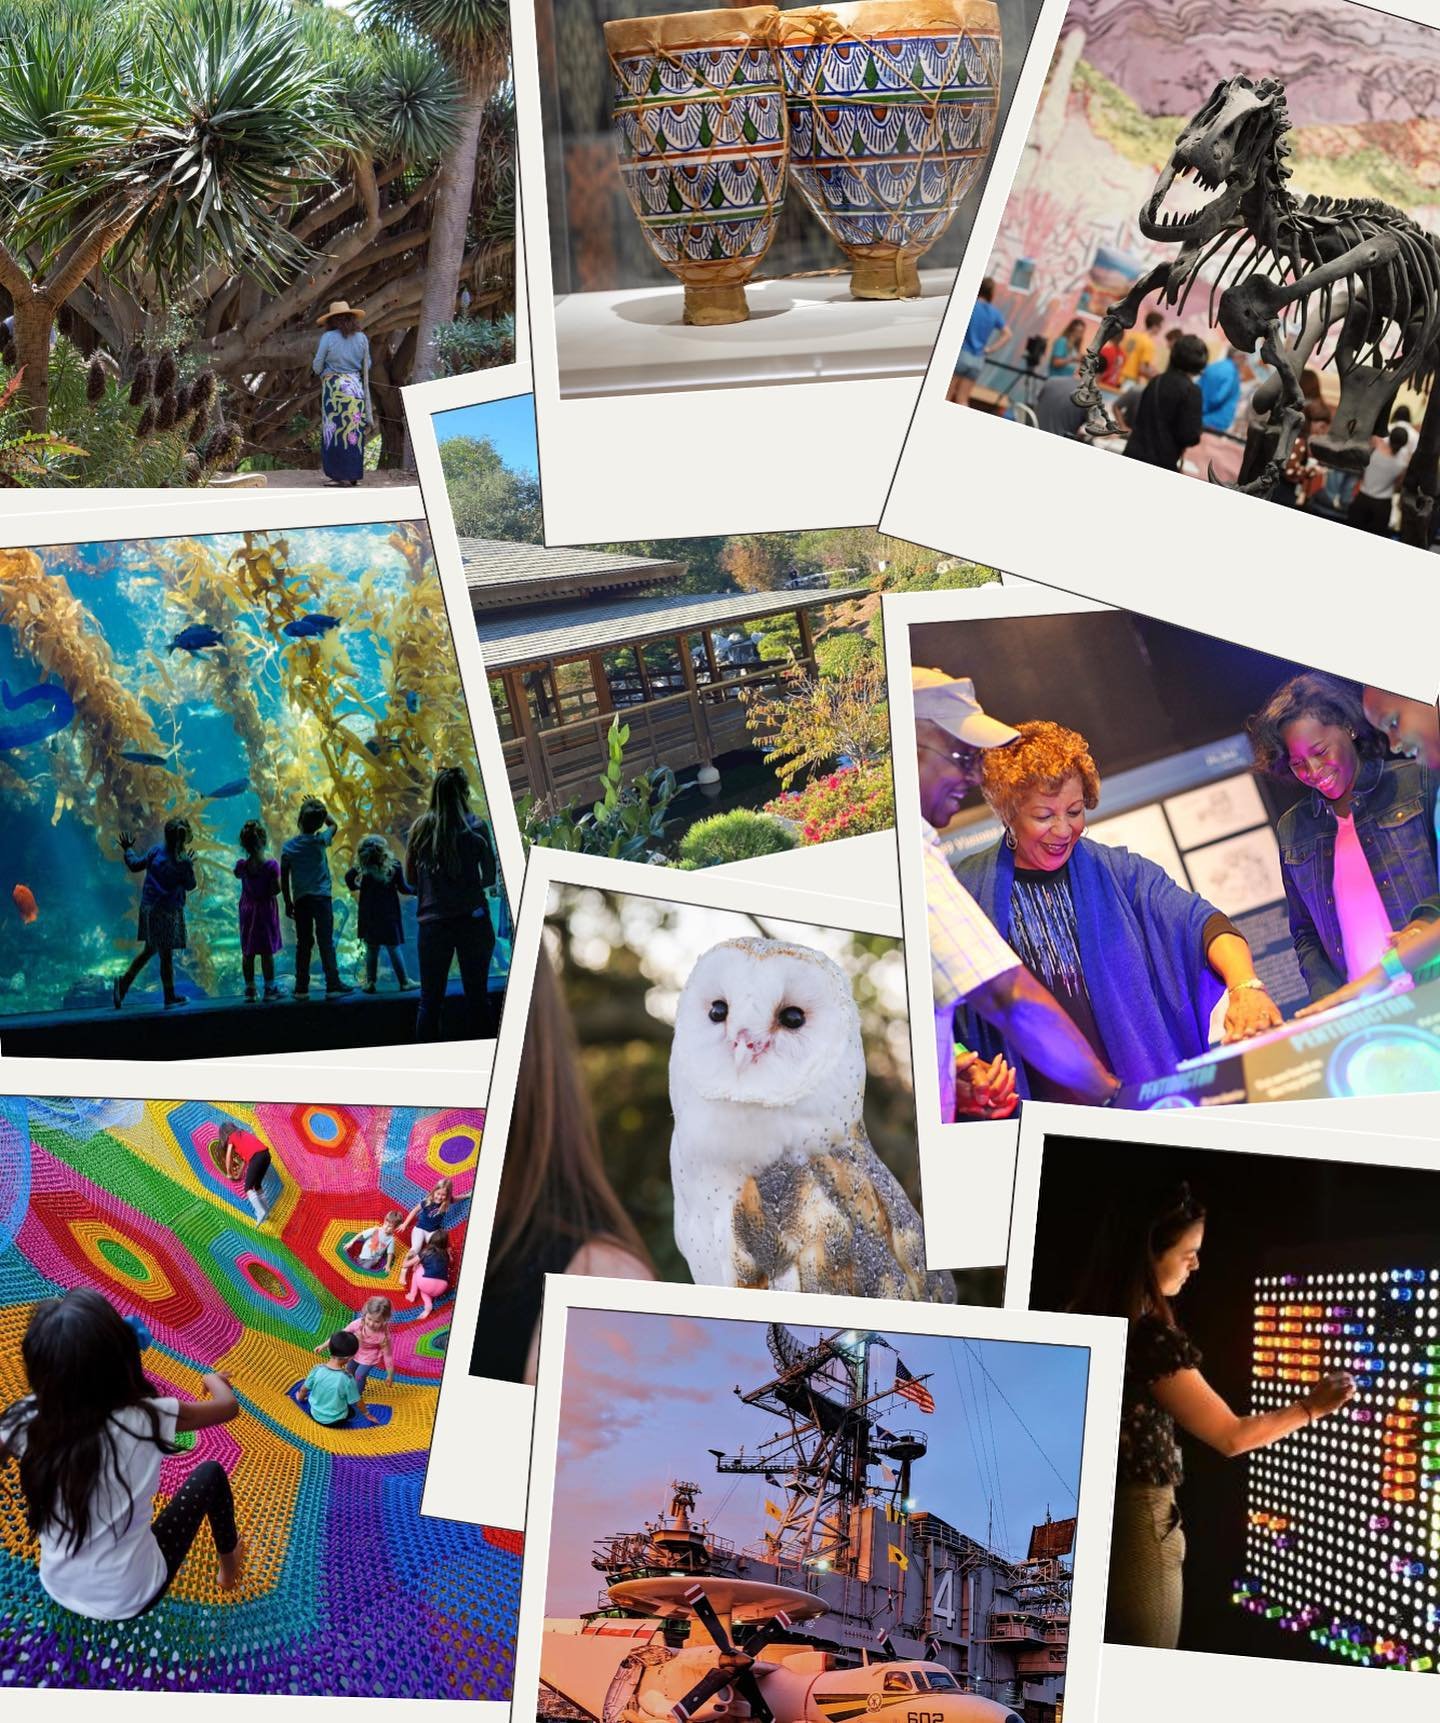 Did you know if you&rsquo;re a member of one of 50+ participating San Diego County museums, you can use your membership to visit any of the other museums on the list for FREE now through May 18th? It&rsquo;s called The Big Exchange! Below are some of